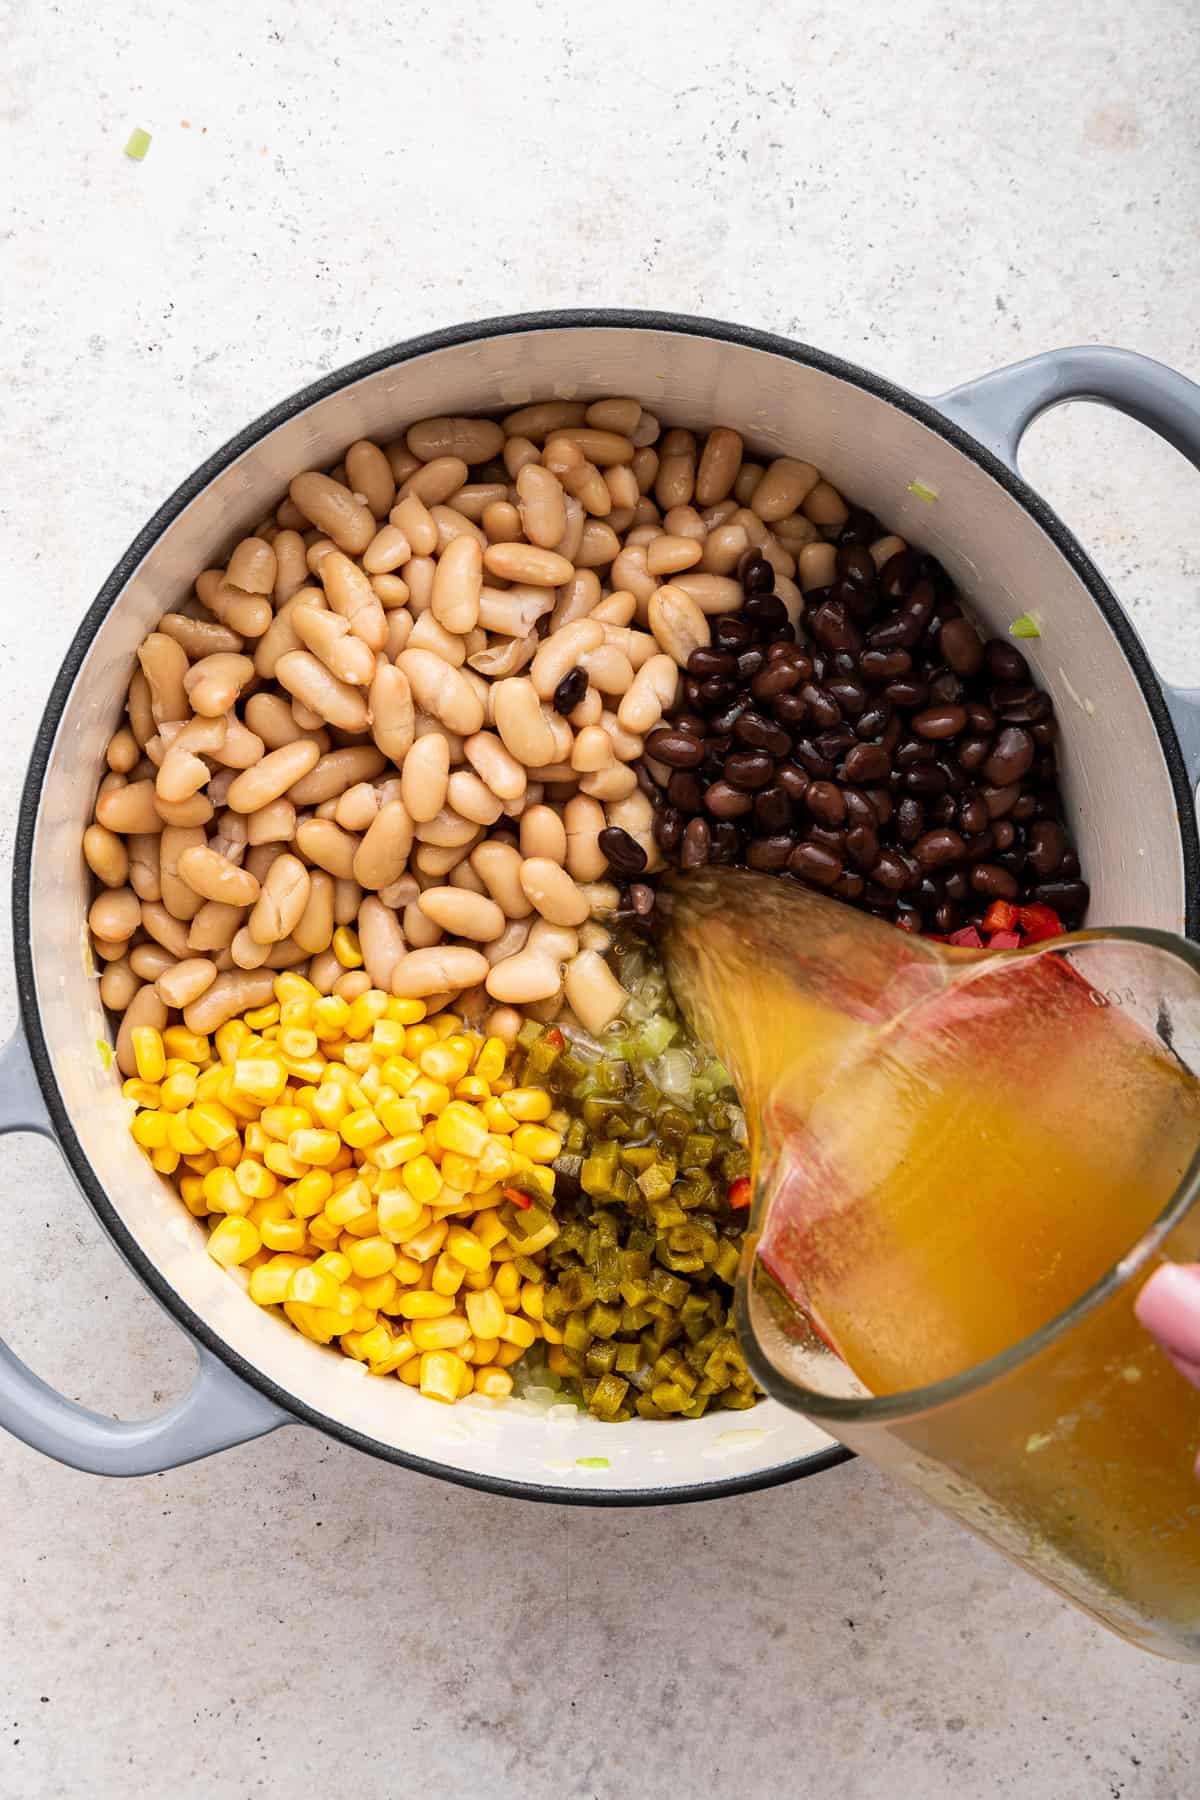 Adding chicken broth to the beans, peppers and corn.